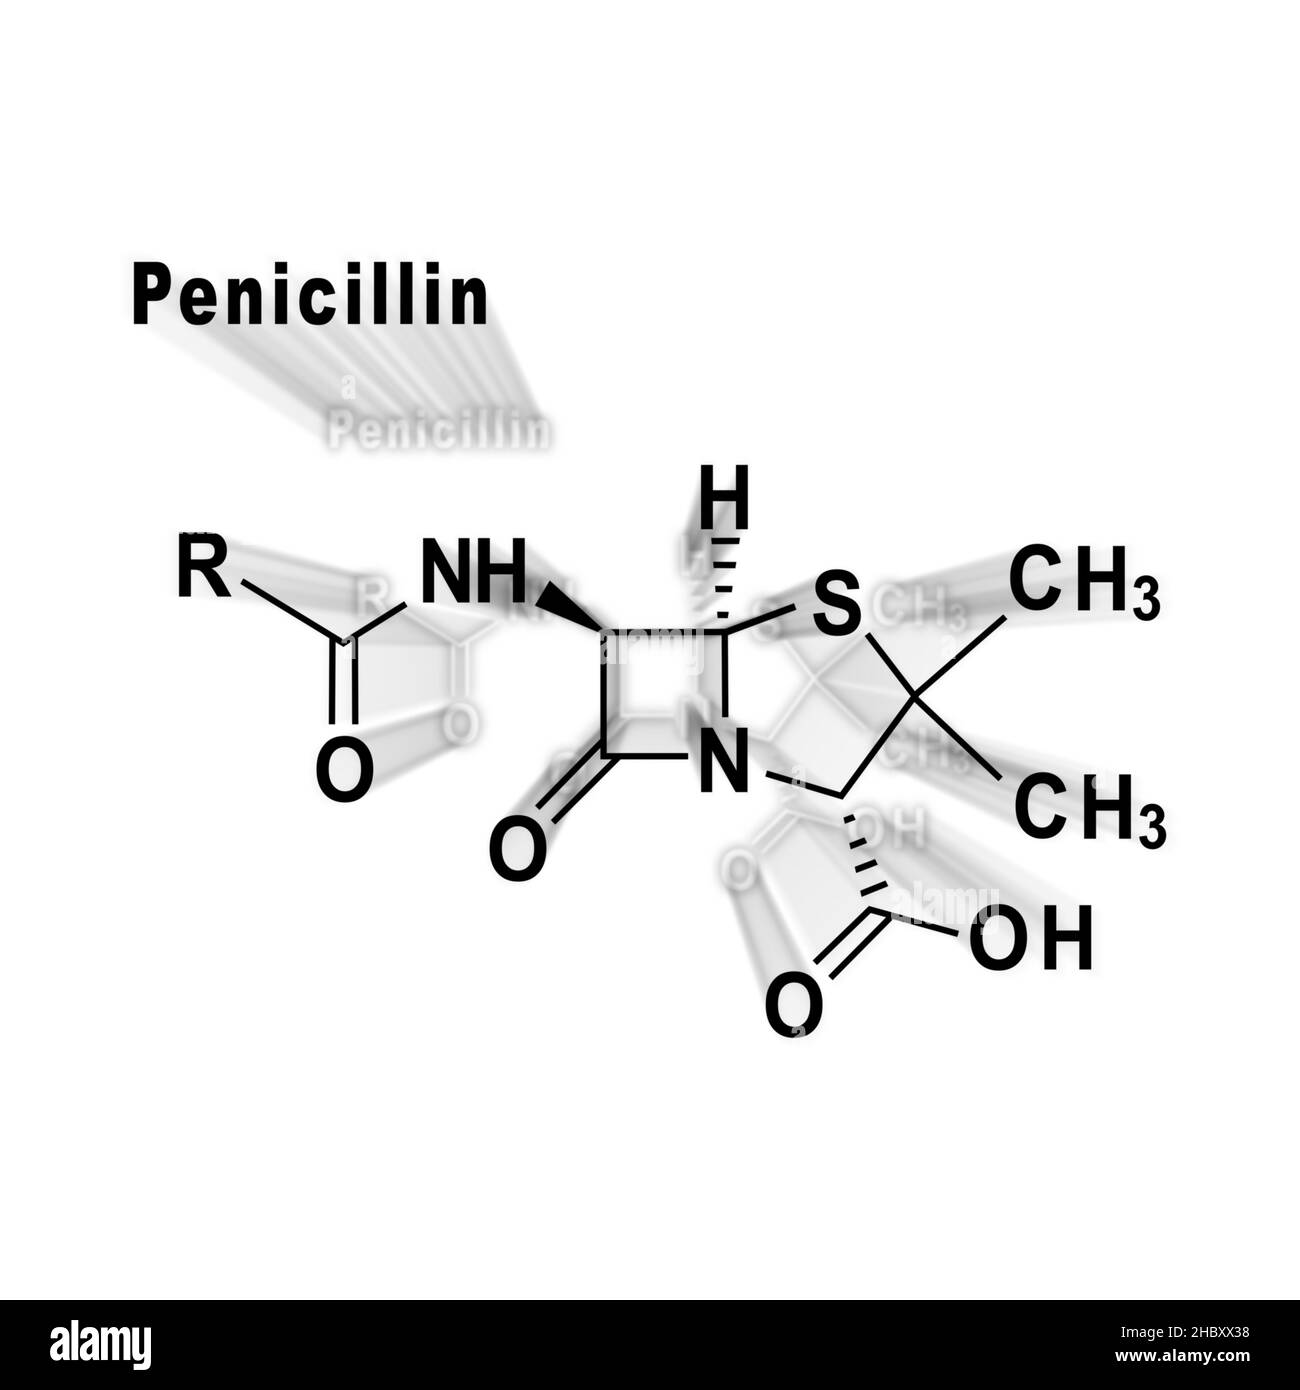 Penicillin, antibiotic drug, Structural chemical formula on a white background Stock Photo